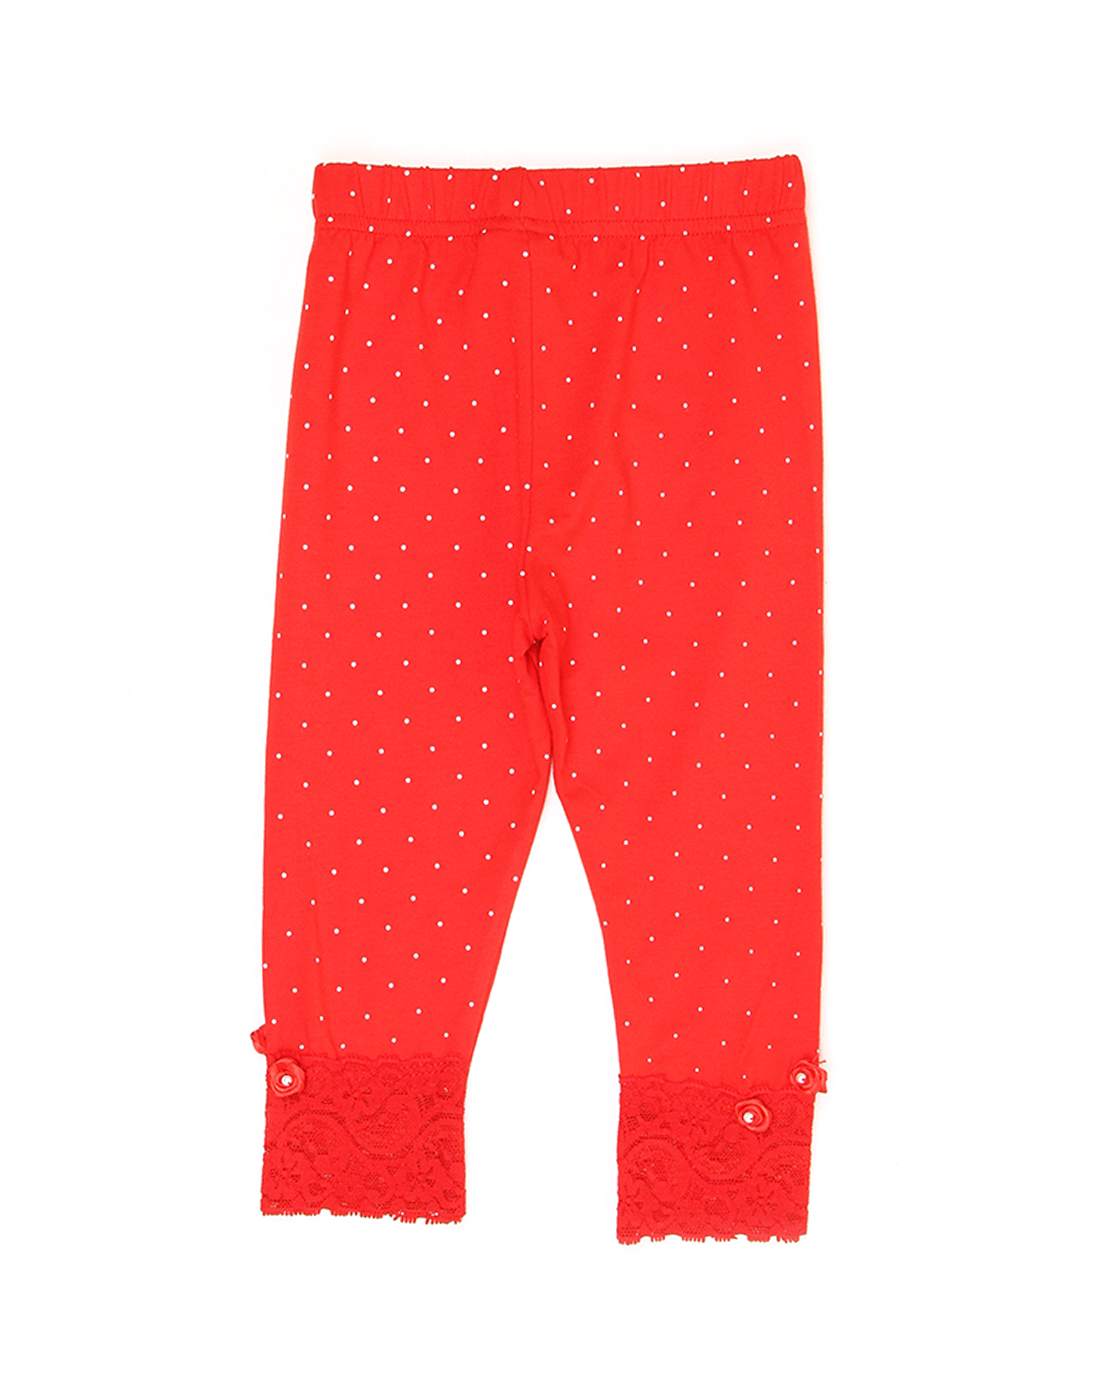 Actuel Infant Casual Wear Red Leggings